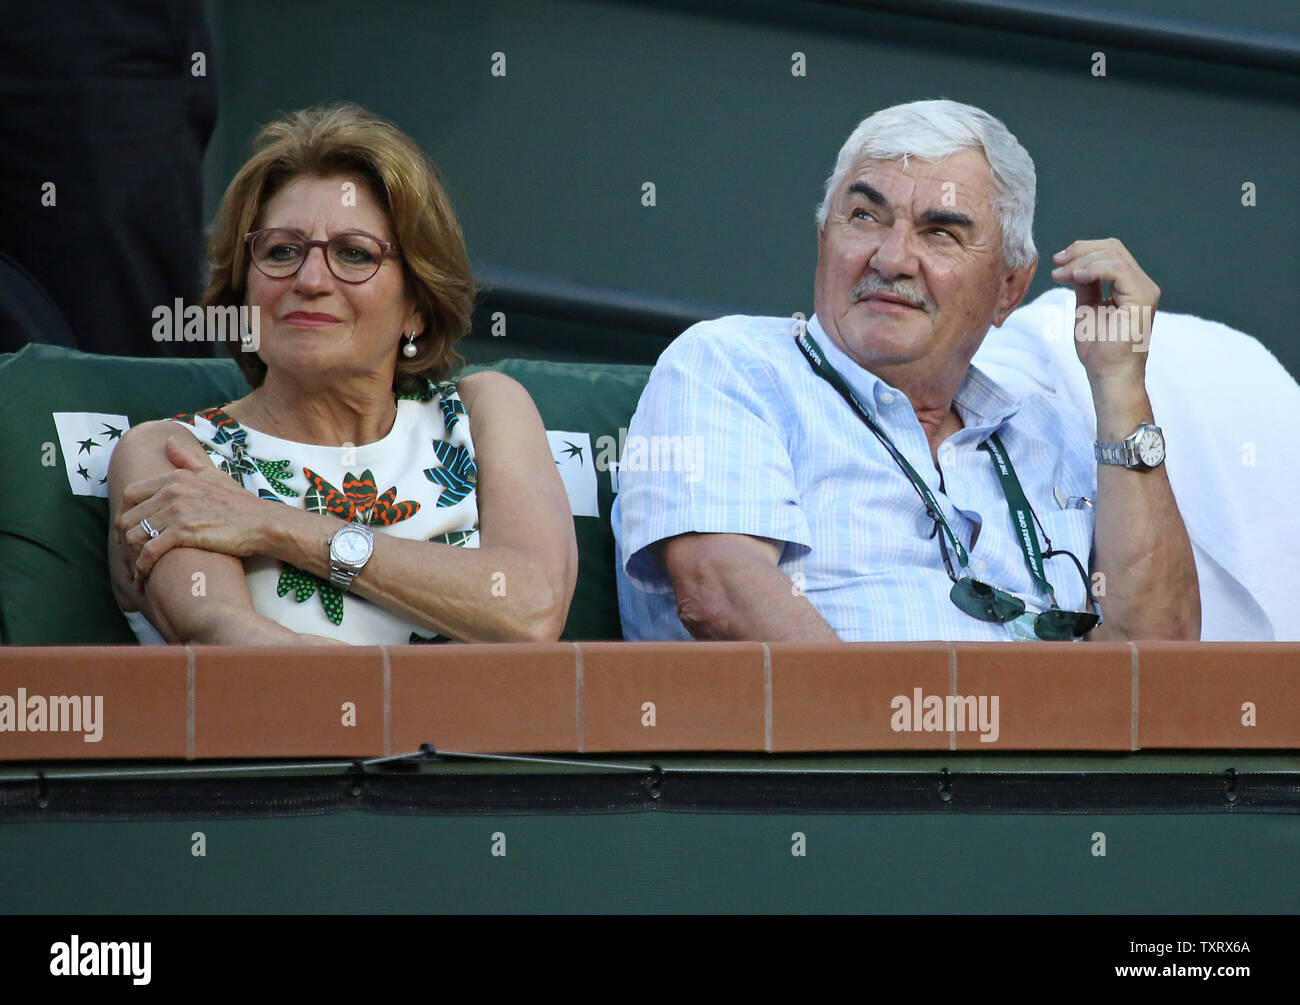 Lynette and Robert Federer, parents of Roger Federer, attend the men's  final match between Dominic Thiem of Austria and Roger Federer of  Switzerland at the BNP Paribas Open in Indian Wells, California